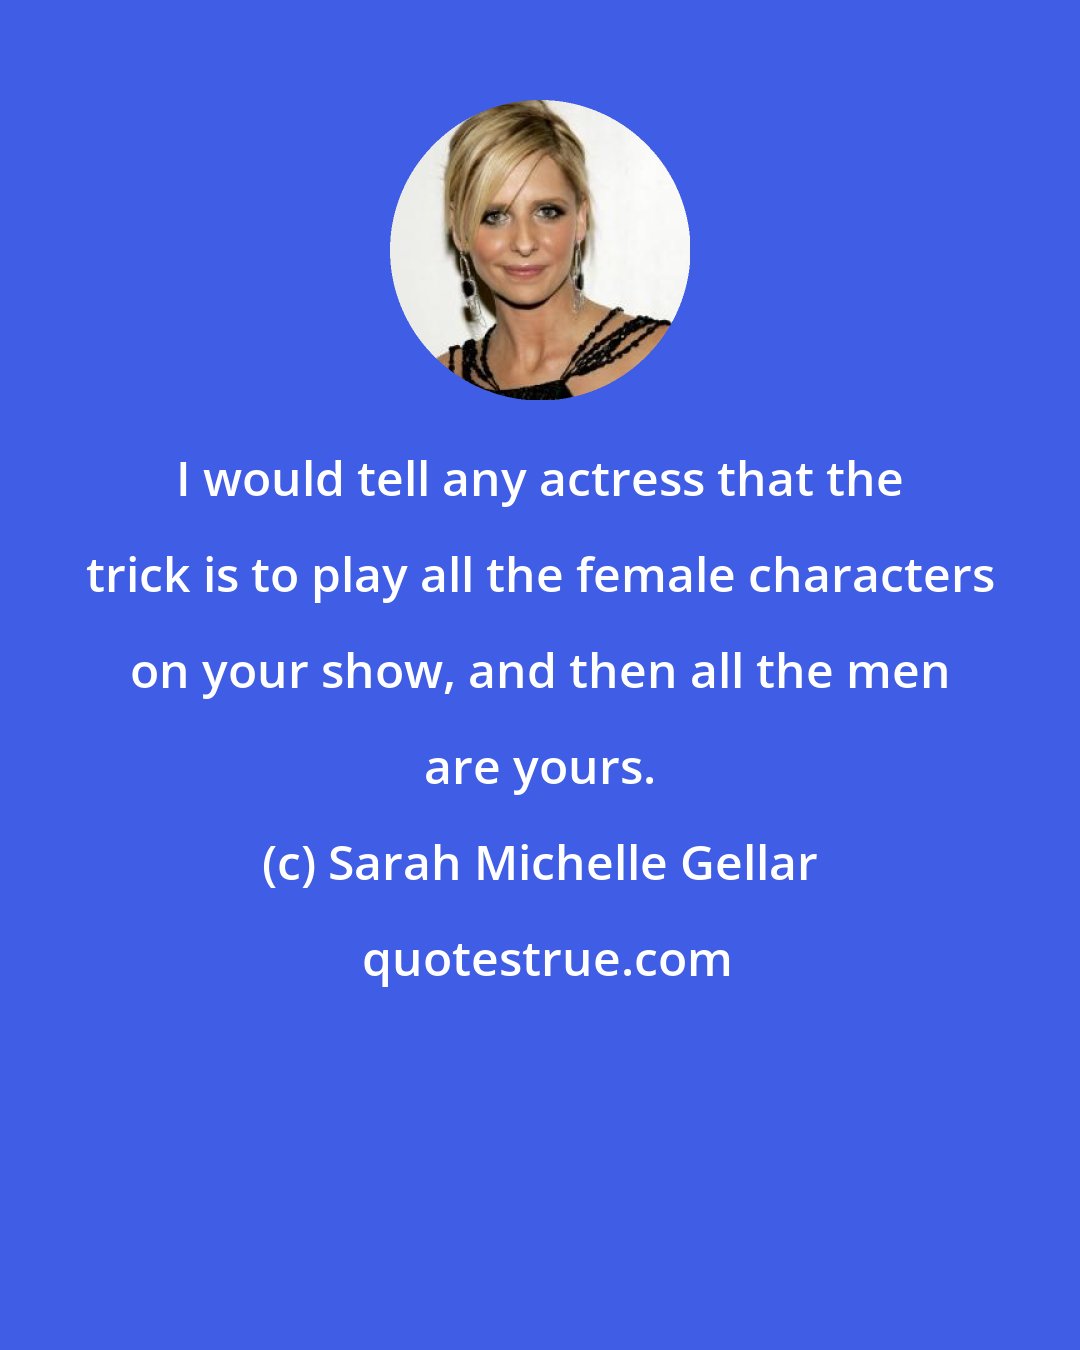 Sarah Michelle Gellar: I would tell any actress that the trick is to play all the female characters on your show, and then all the men are yours.